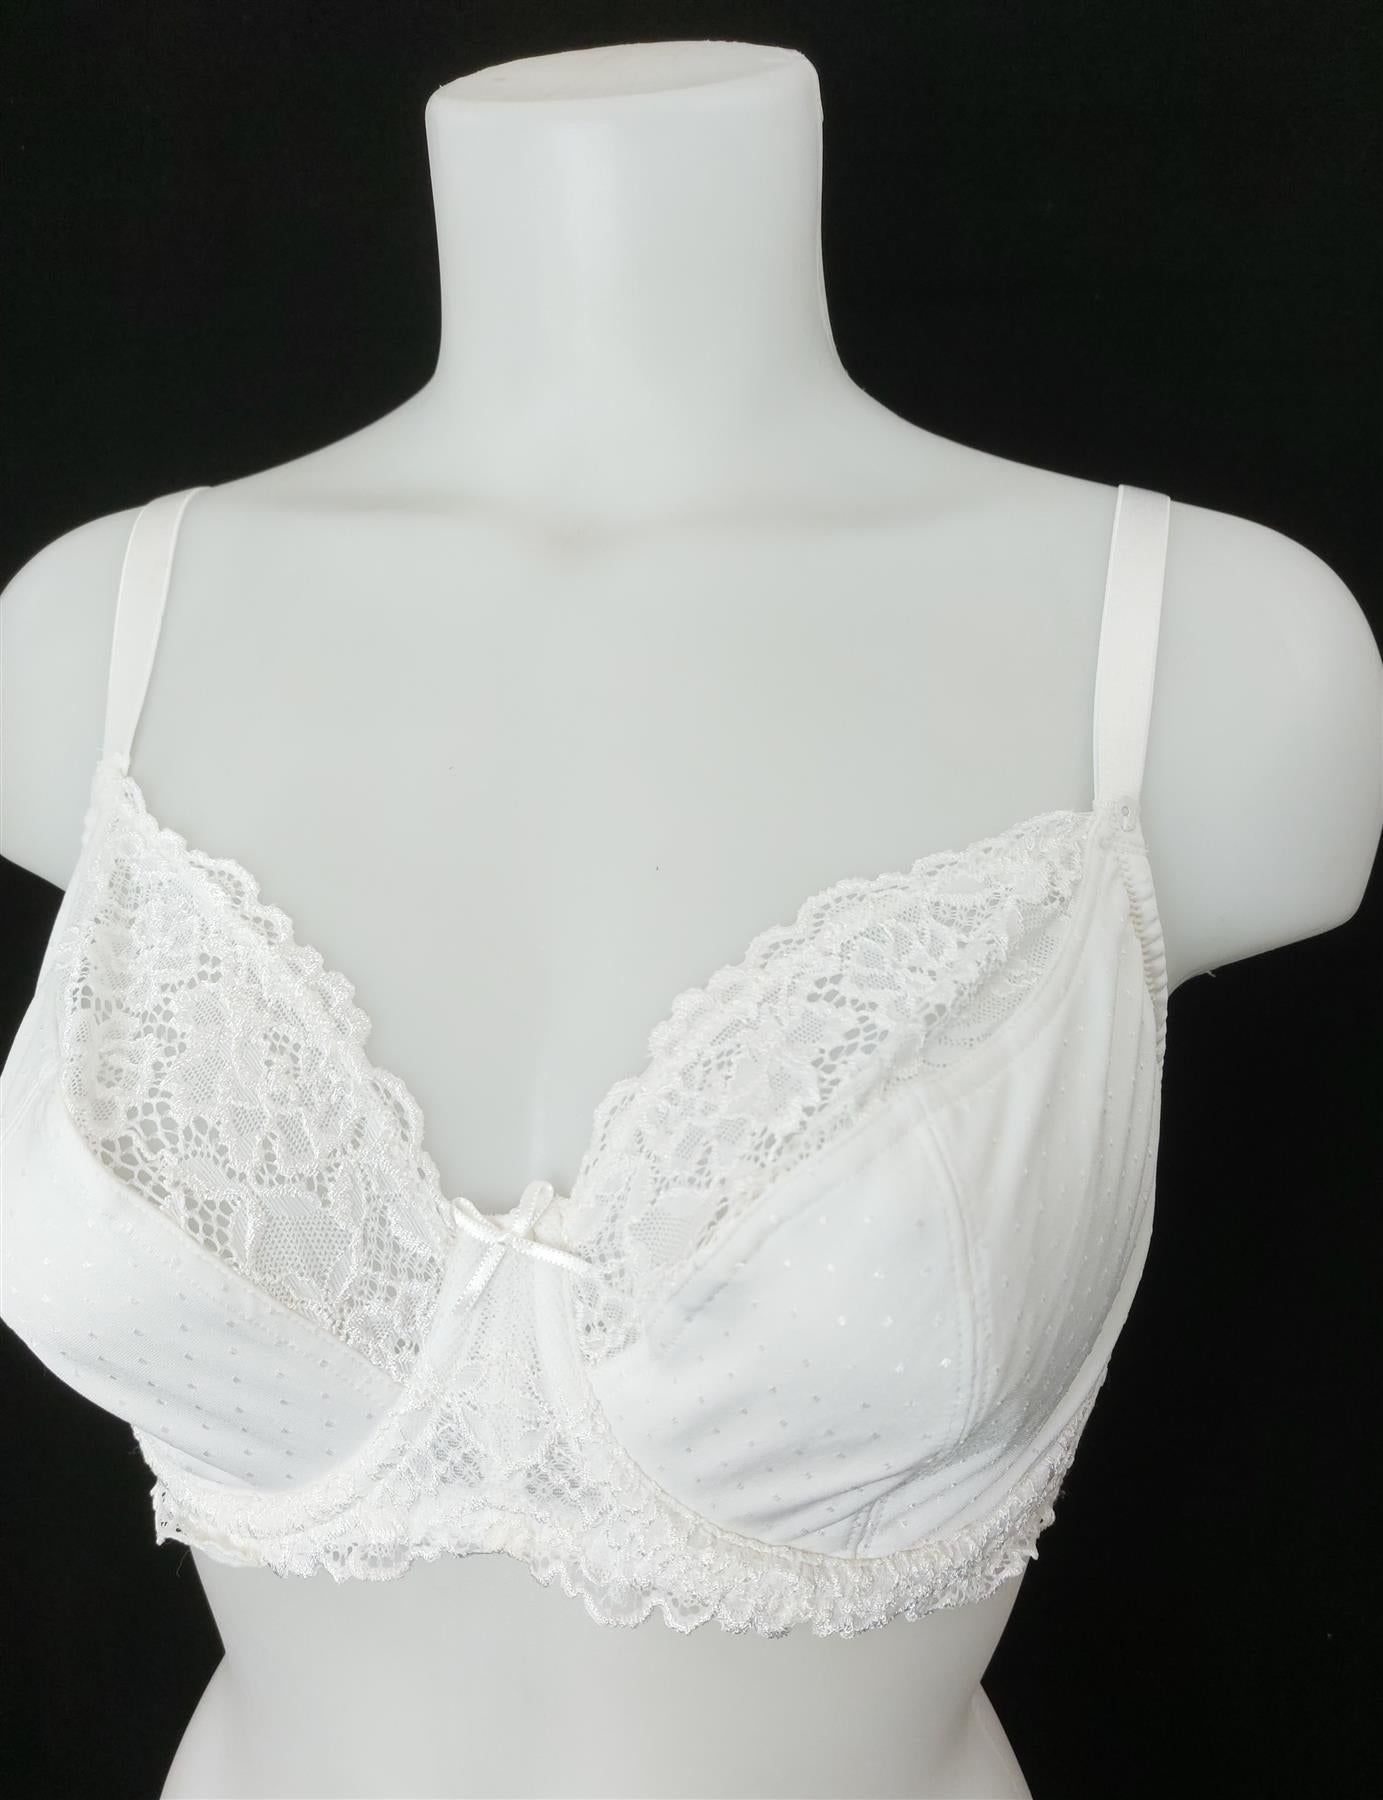 3pk White Lace Underwired Bras Unpadded Shop Soiled Multipack 36C Bras Brand New